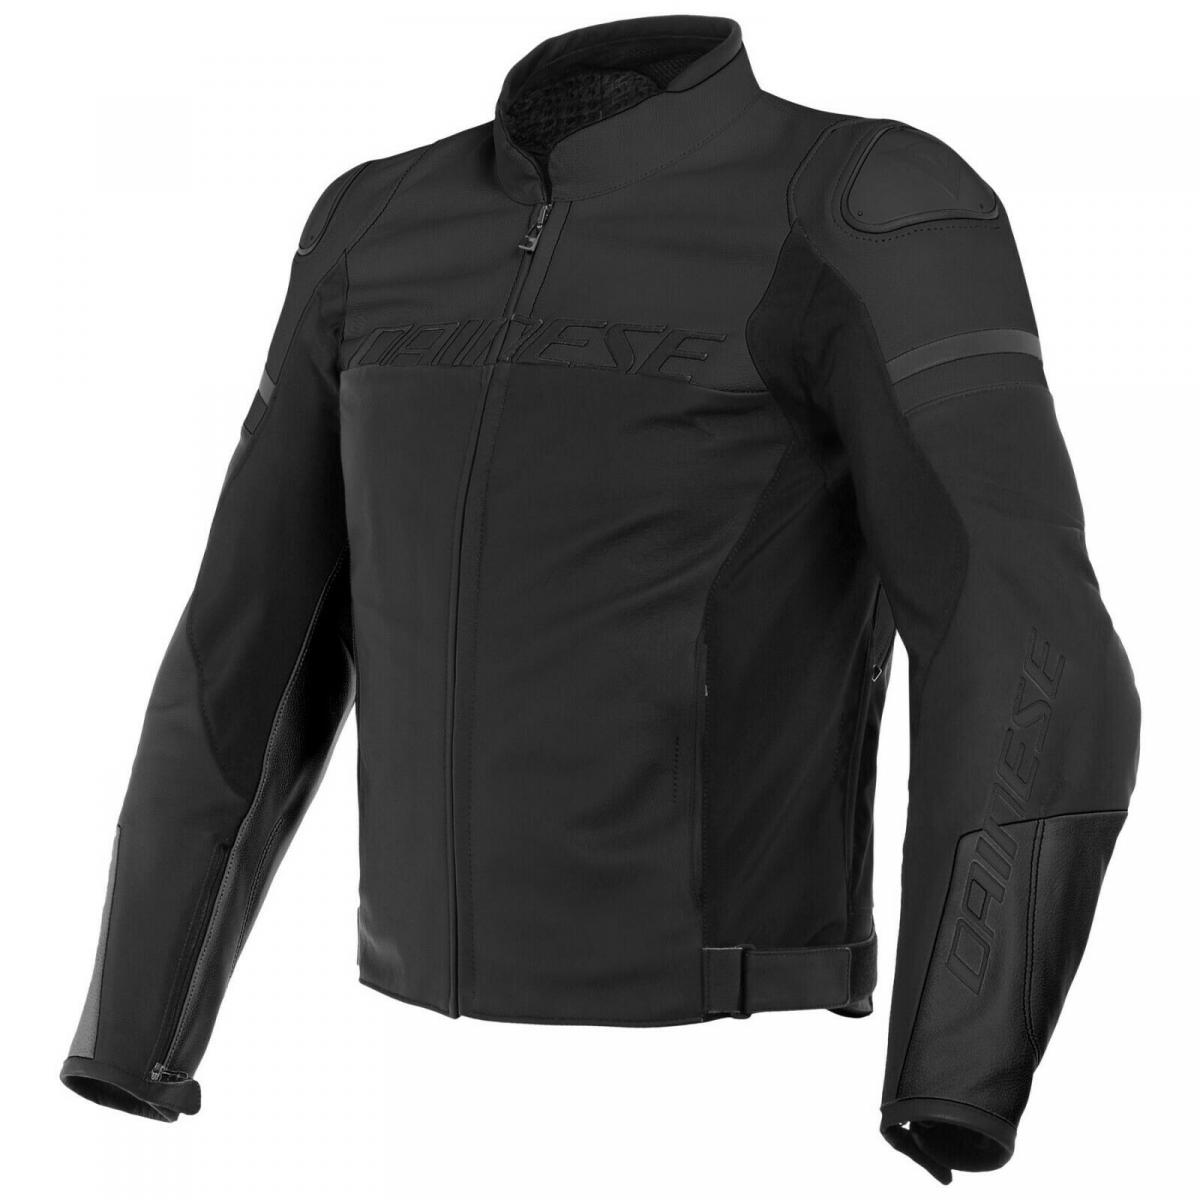 DAINESE AGILE LEATHER JACKET BLACK - P&H Motorcycles